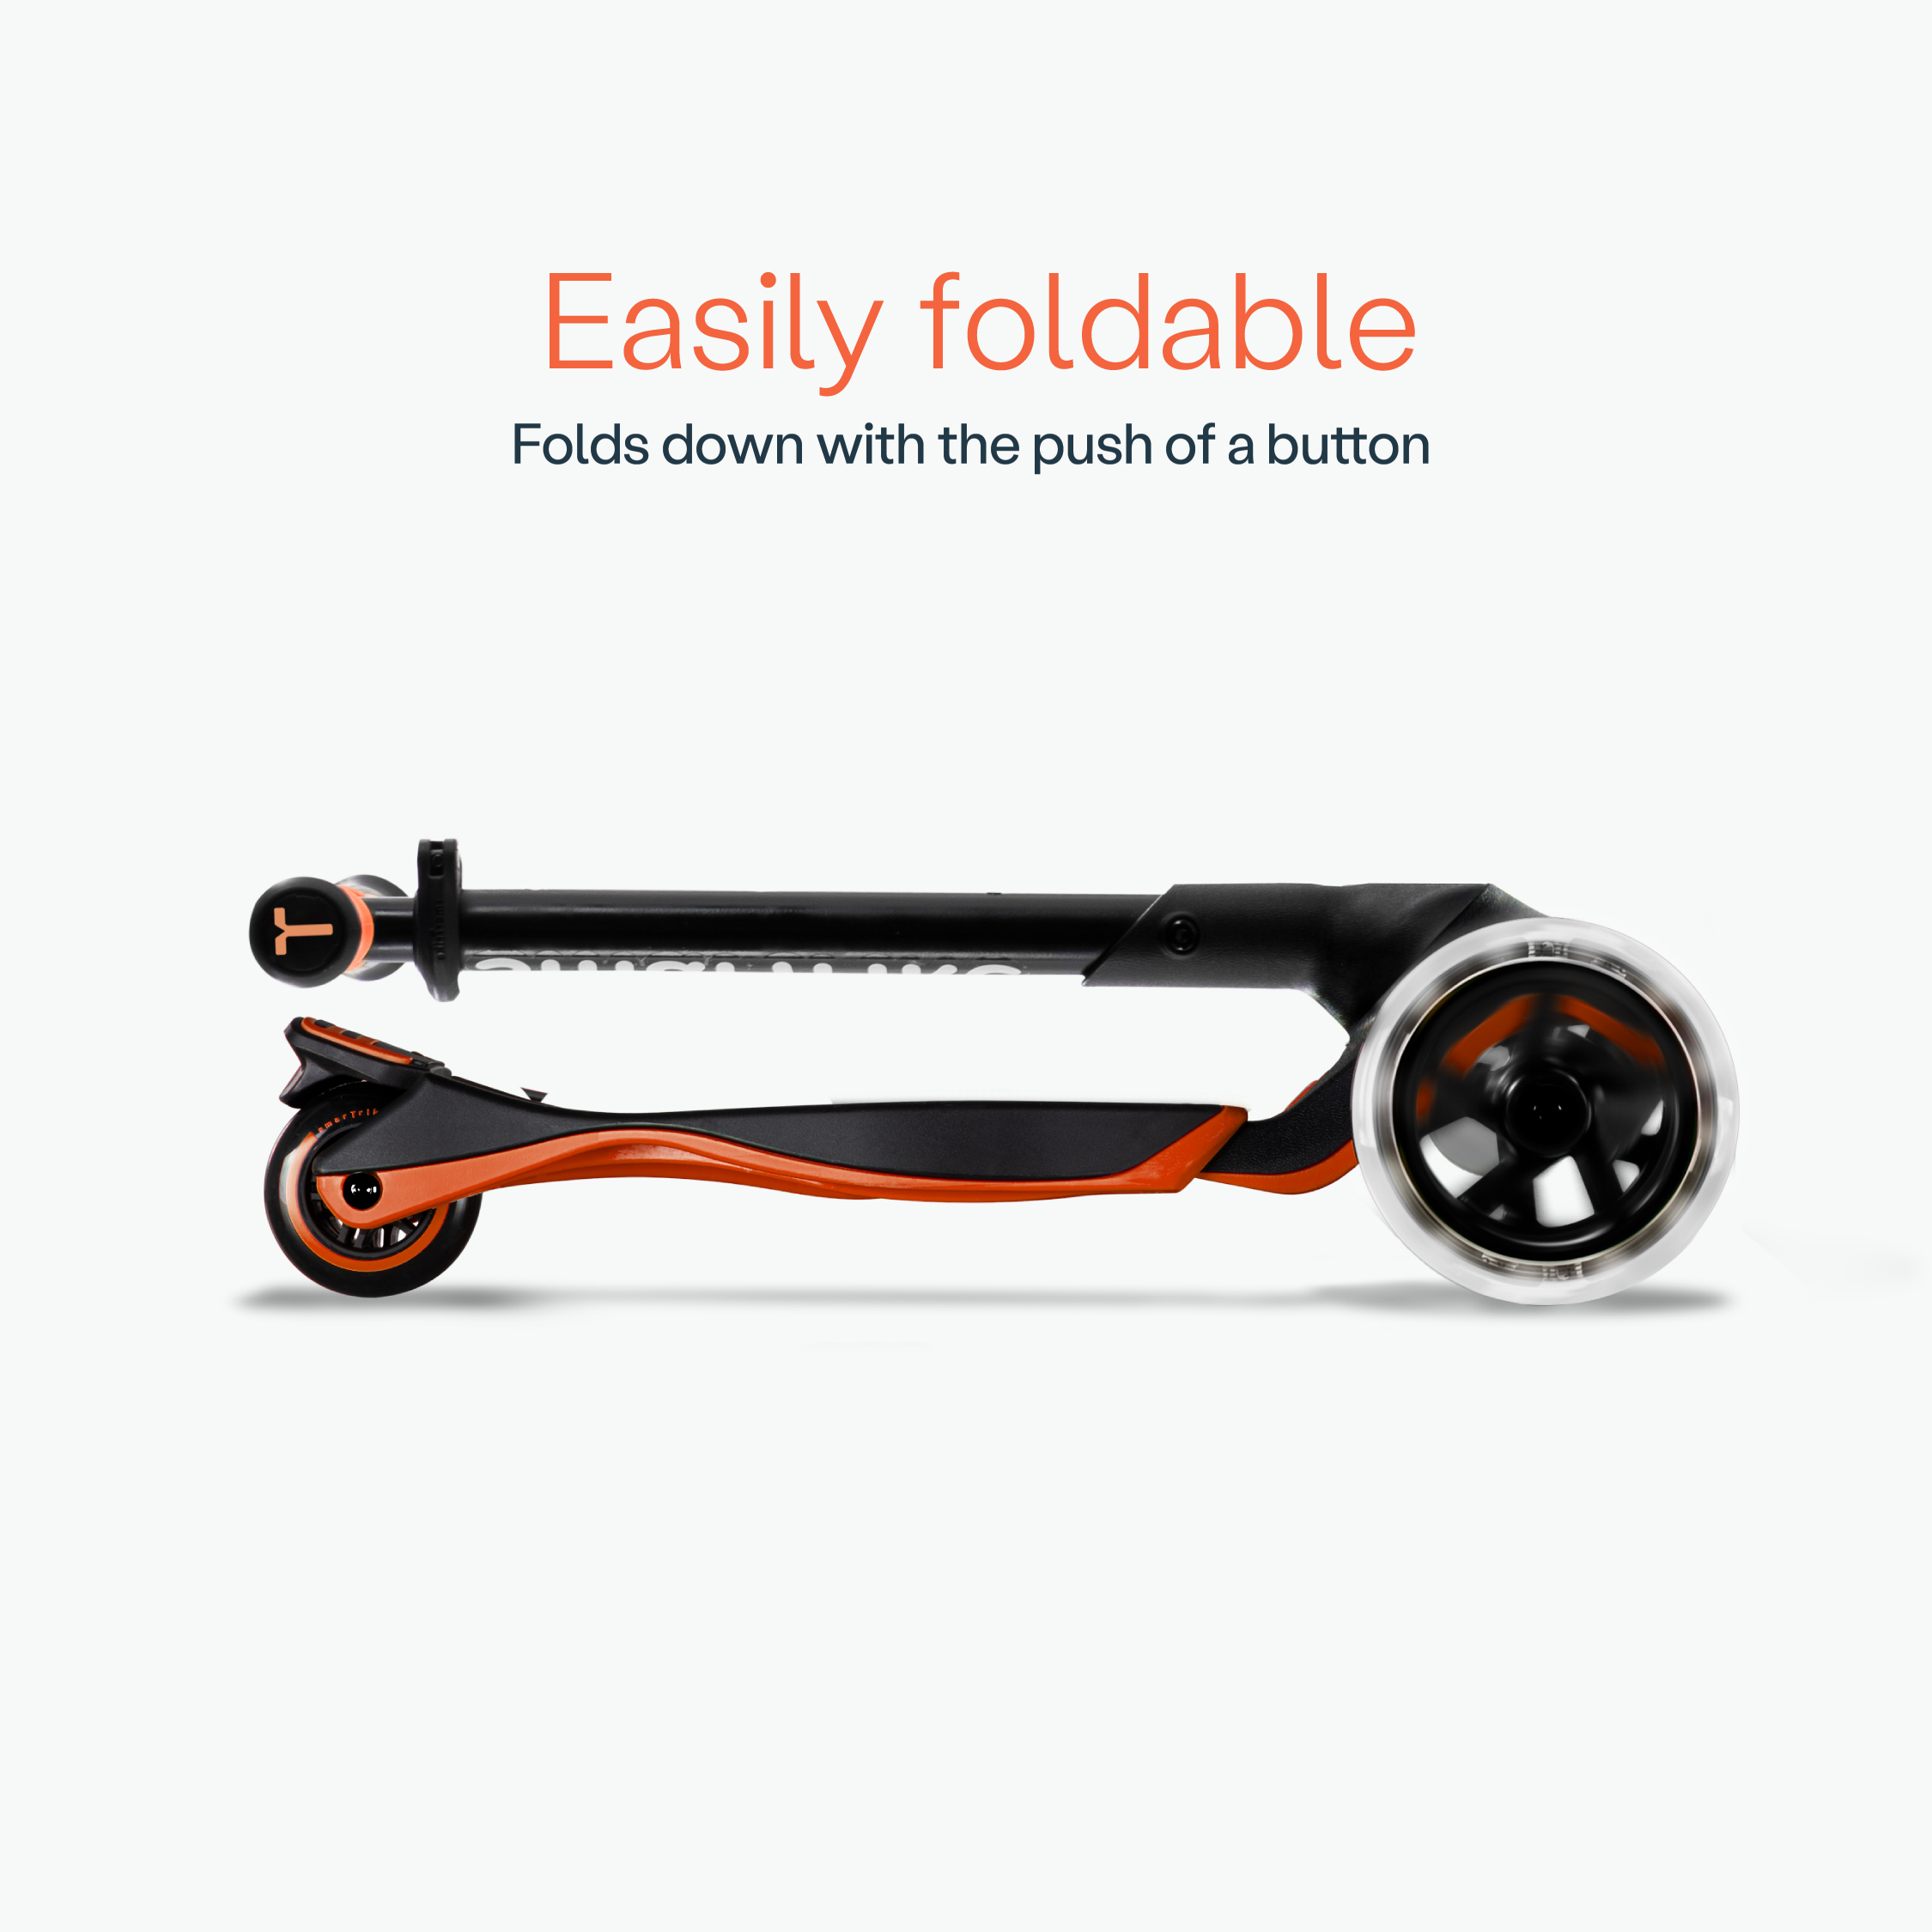 Xtend Scooter - Orange - easily foldable.